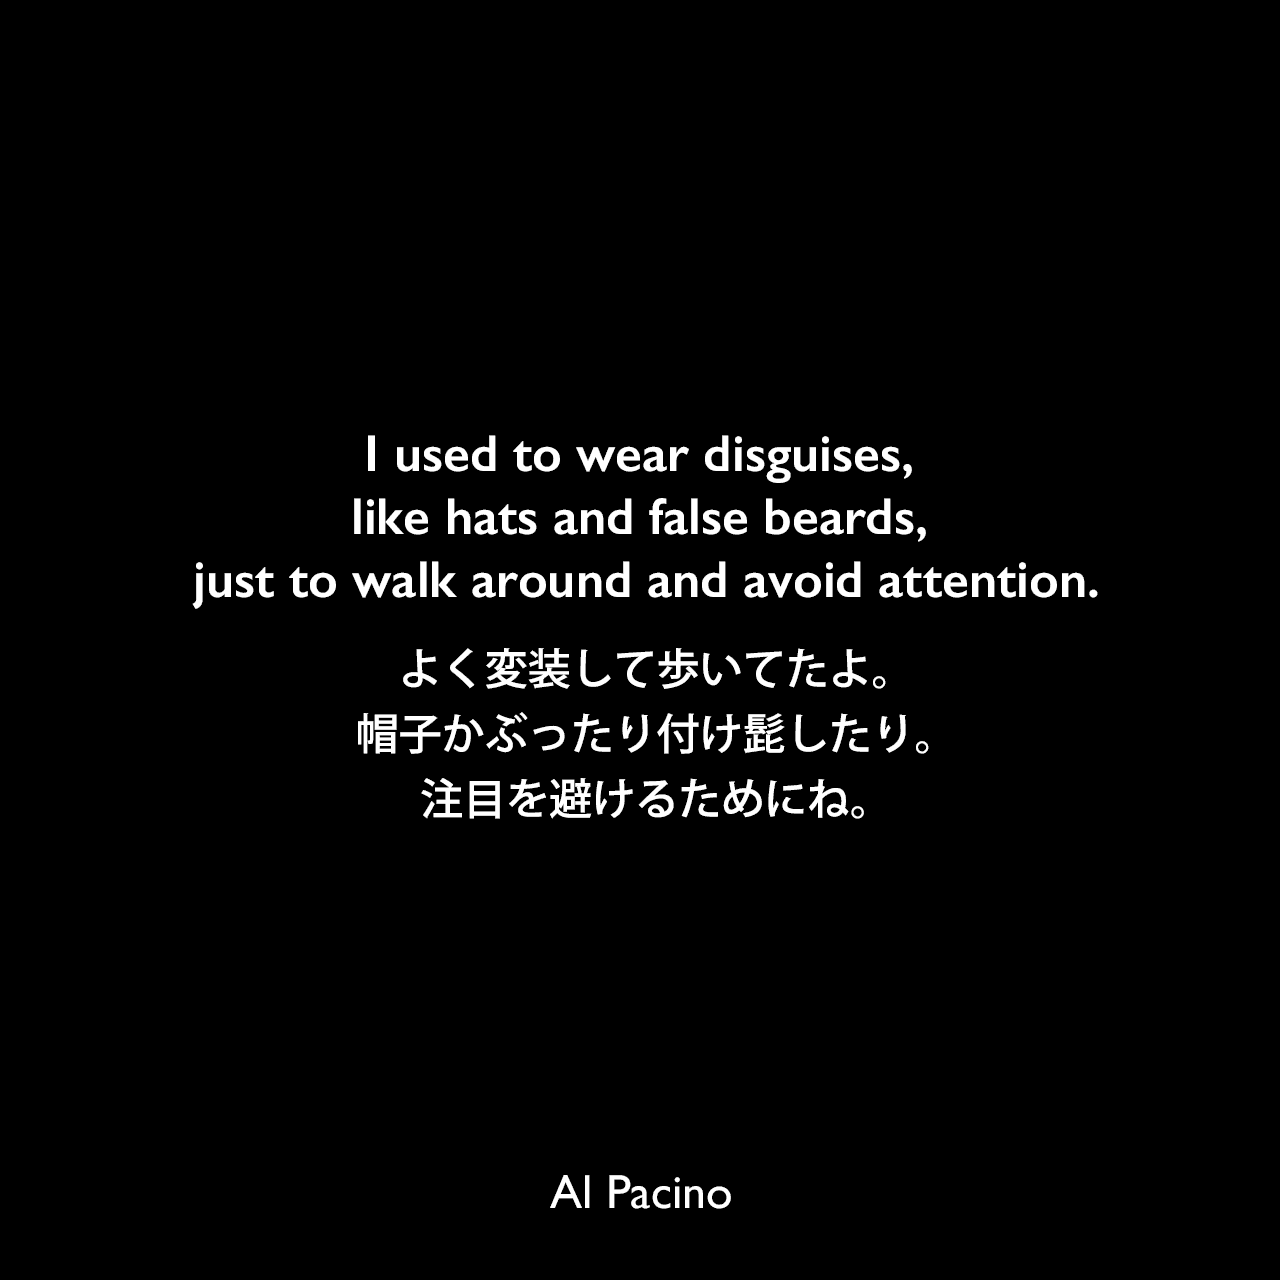 I used to wear disguises, like hats and false beards, just to walk around and avoid attention.よく変装して歩いてたよ。帽子かぶったり付け髭したり。注目を避けるためにね。Al Pacino